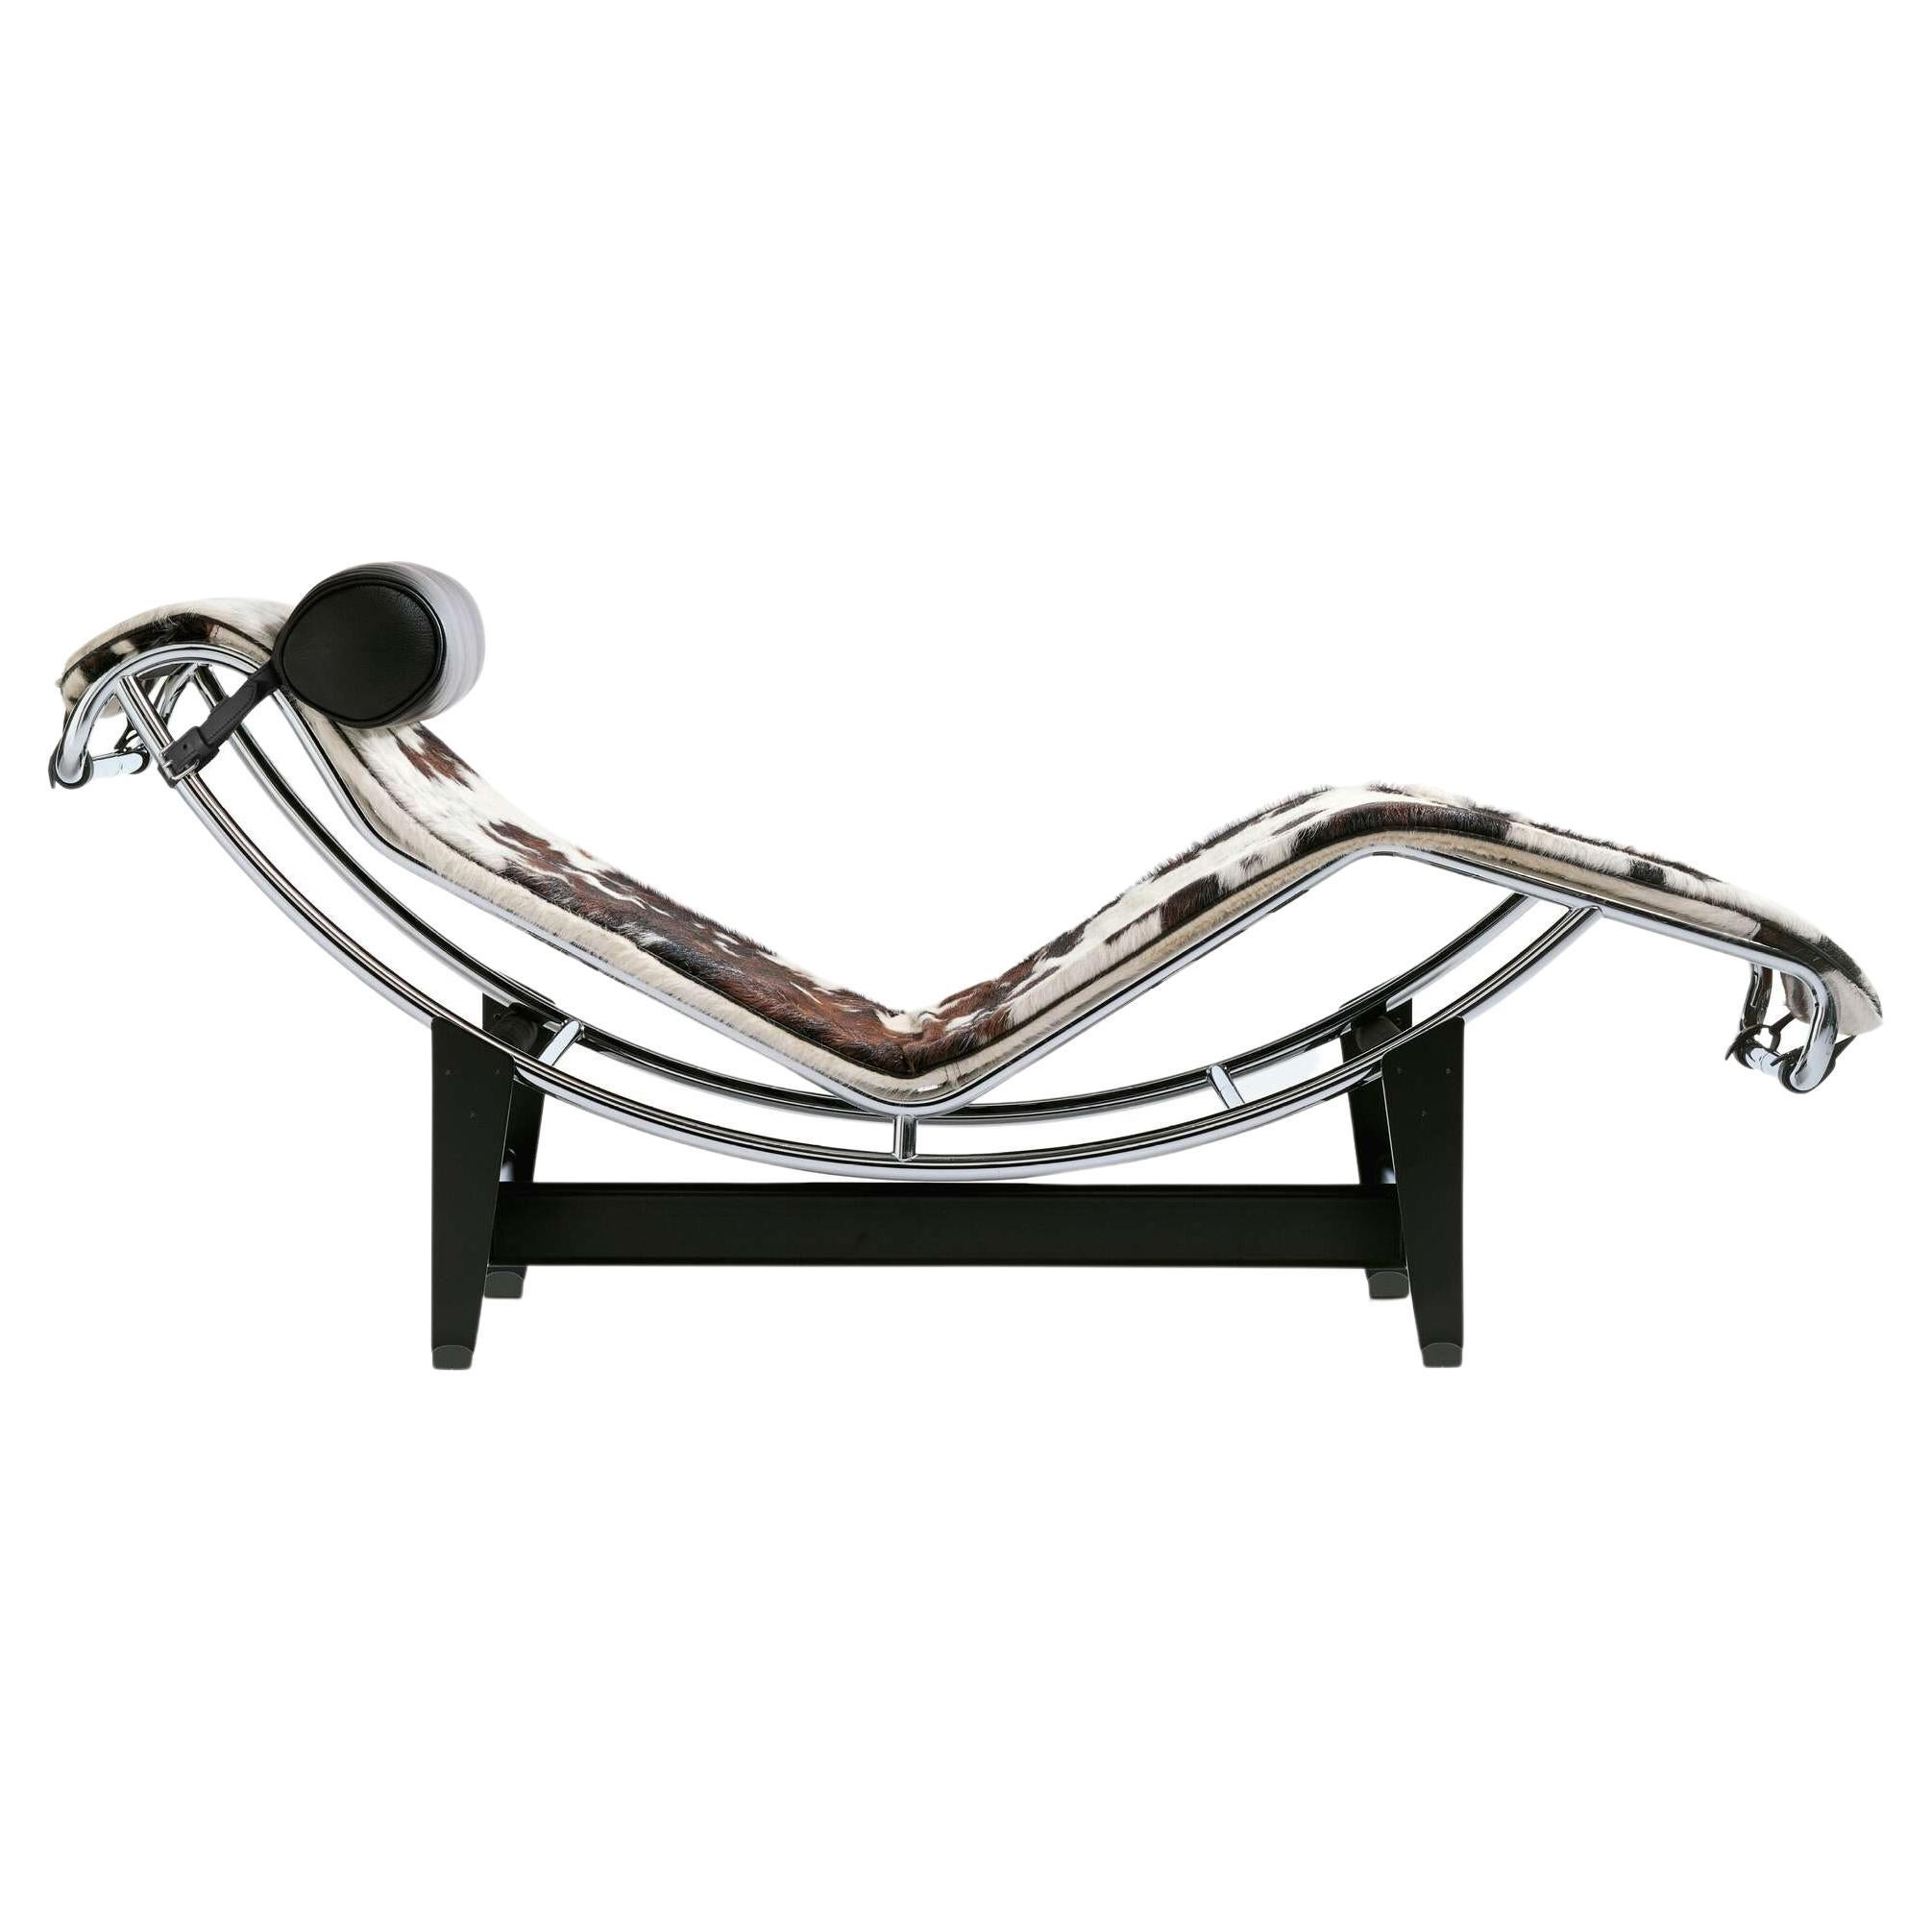 Le Corbusier, Pierre Jeanneret, Charlotte Perriand LC4 Chaise Longue for Cassina